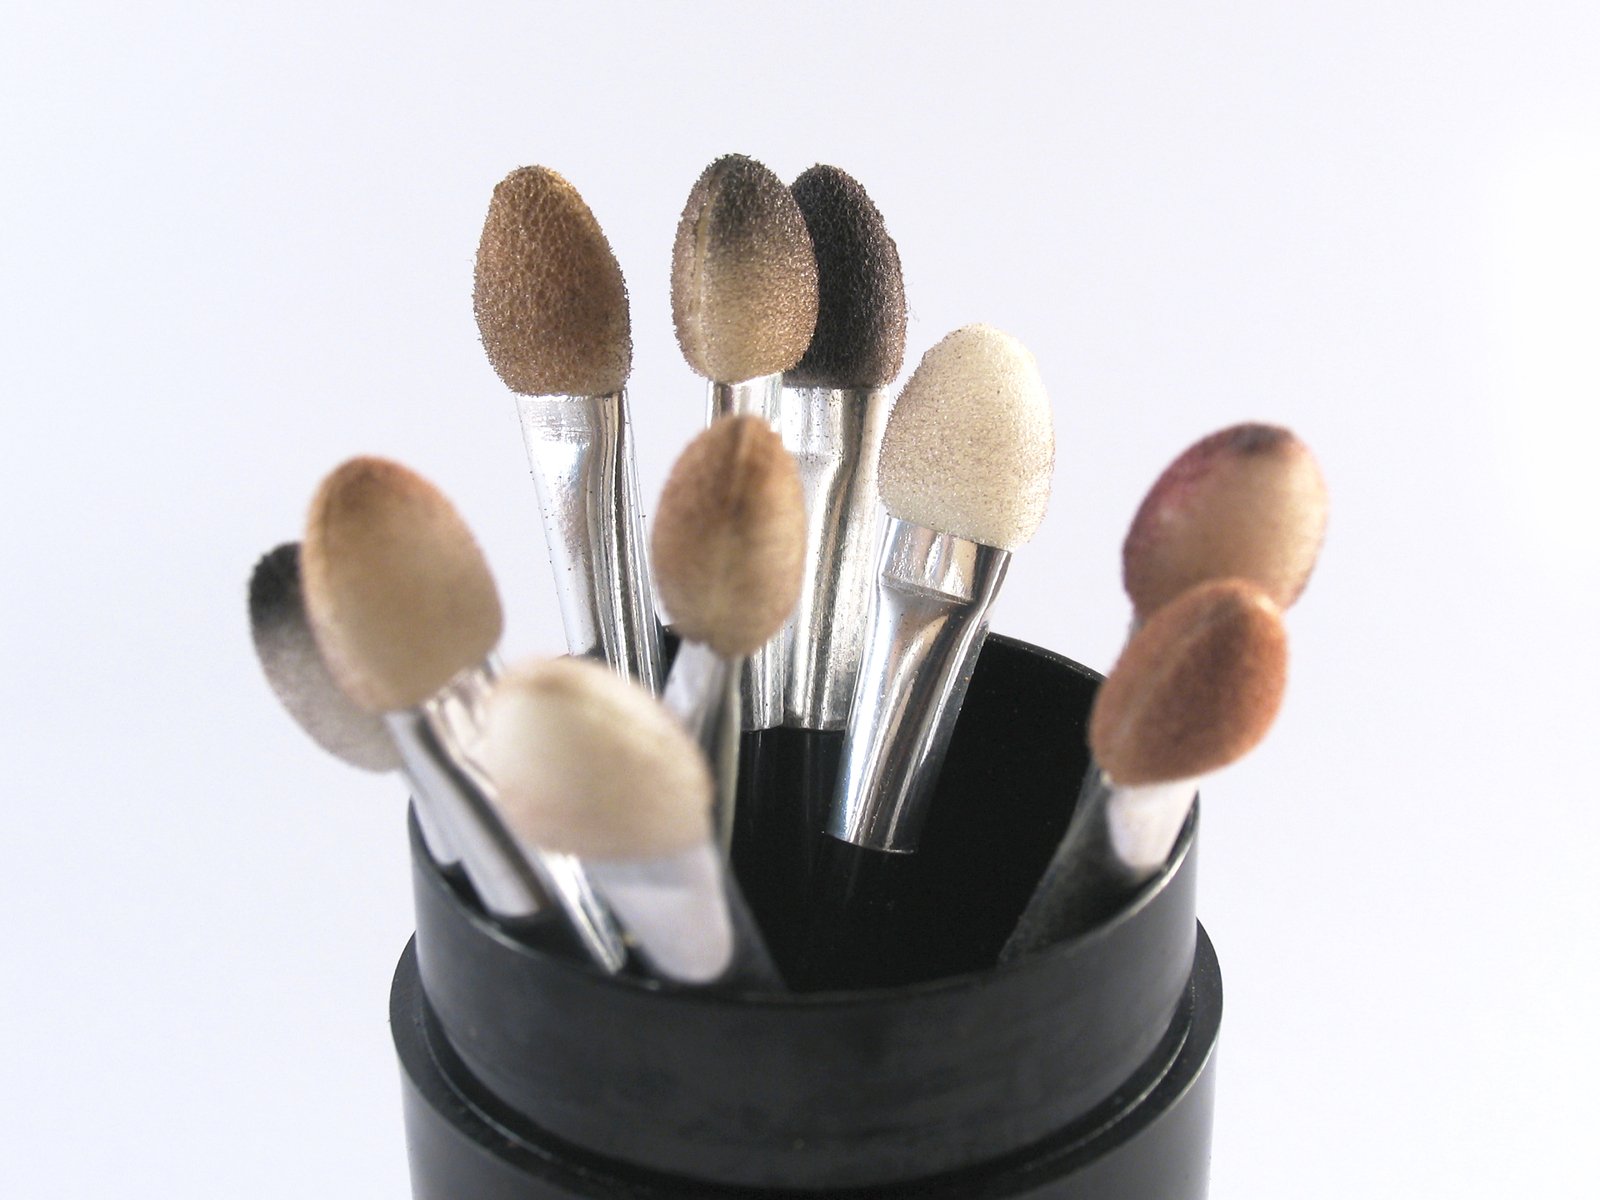 a cup is filled with makeup brushes on a white background